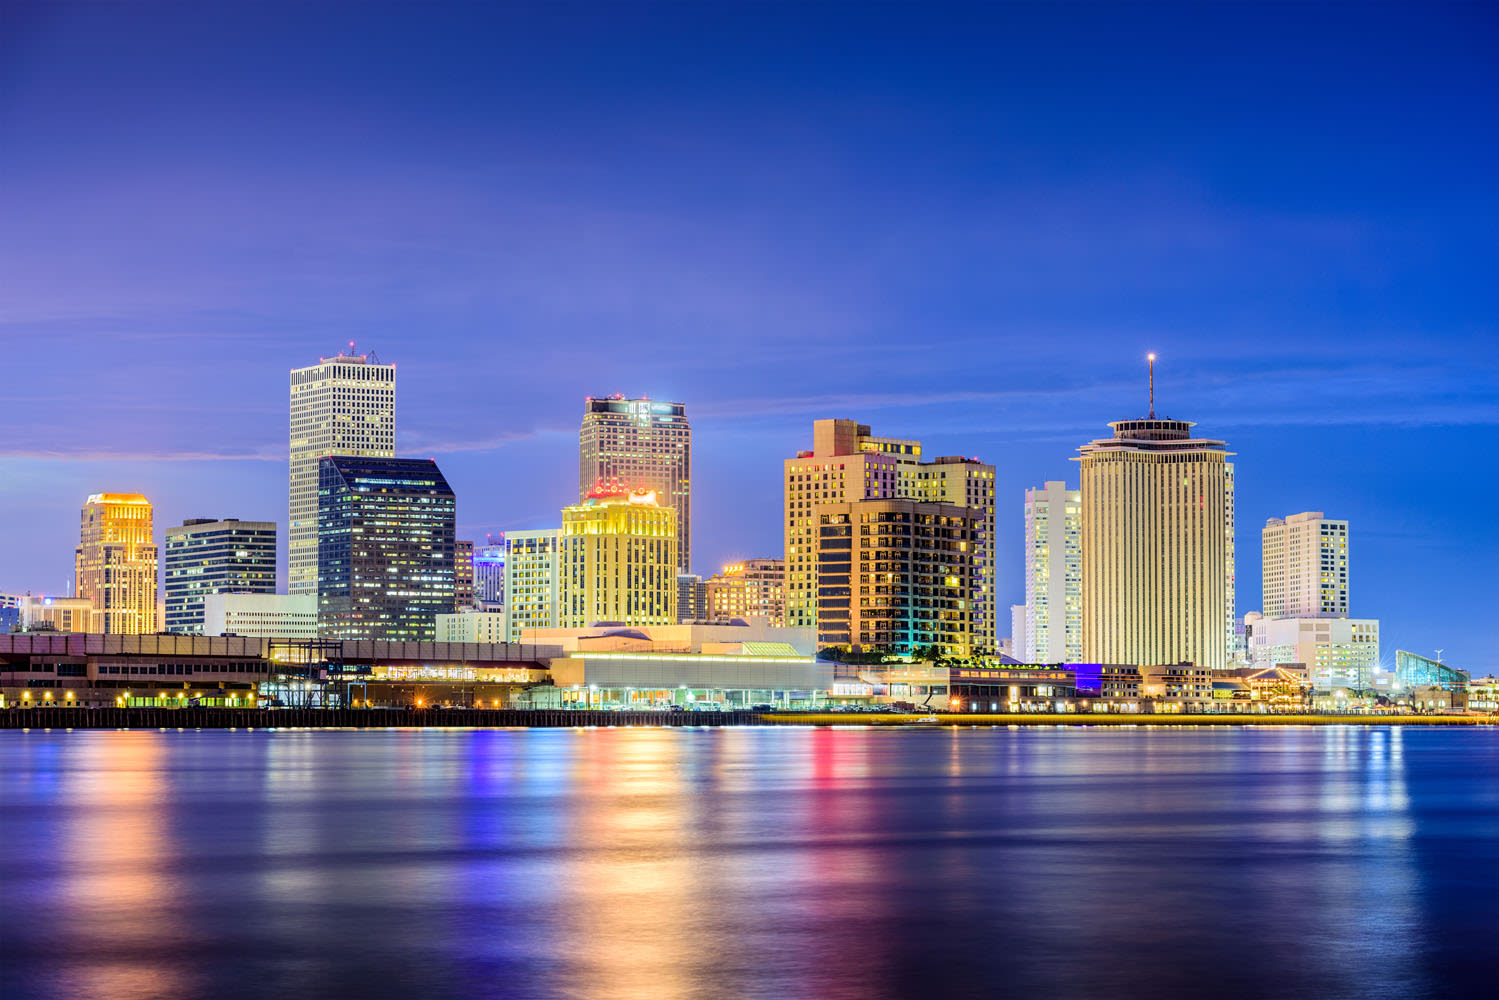 Dream destinations: Four reasons to visit New Orleans | Virgin